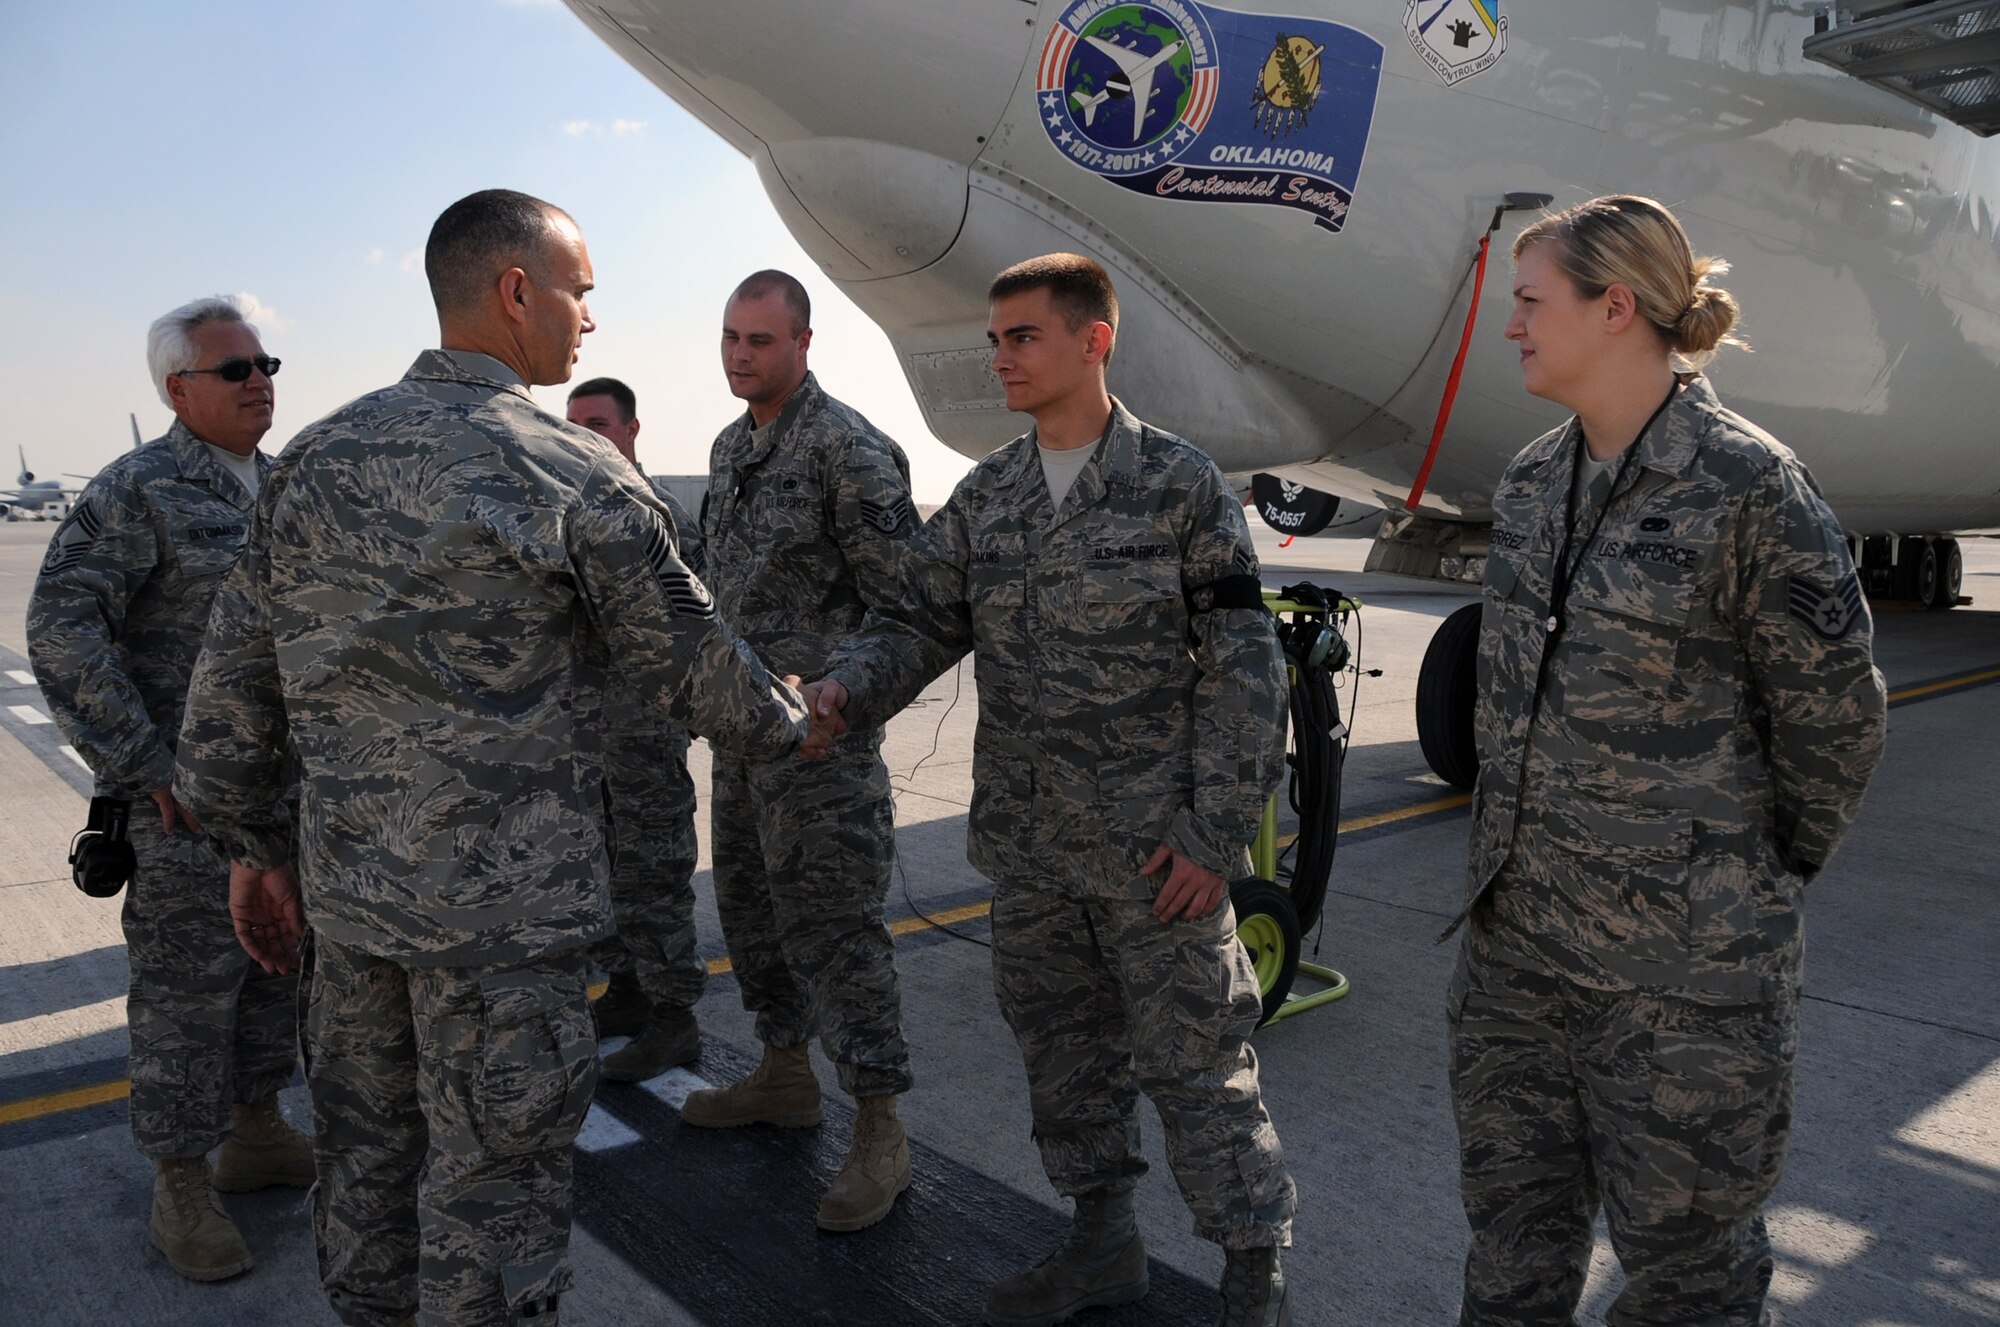 Chief Master Sgt. Mark Villella, command chief master sergeant for Air Forces Central Command, meets with E-3 Sentry maintenance Airmen during his visit to the 380th Air Expeditionary Wing at a non-disclosed base in Southwest Asia on Jan. 6, 2010.  During his visit, Chief Villella learned about the diverse mission of the 380th AEW that includes air refueling, surveillance, and reconnaissance in support of overseas contingency operations in Southwest Asia. The wing supports Operations Iraqi Freedom and Enduring Freedom and the Combined Joint Task Force-Horn of Africa. (U.S. Air Force Photo/Senior Airman Jenifer Calhoun/Released)